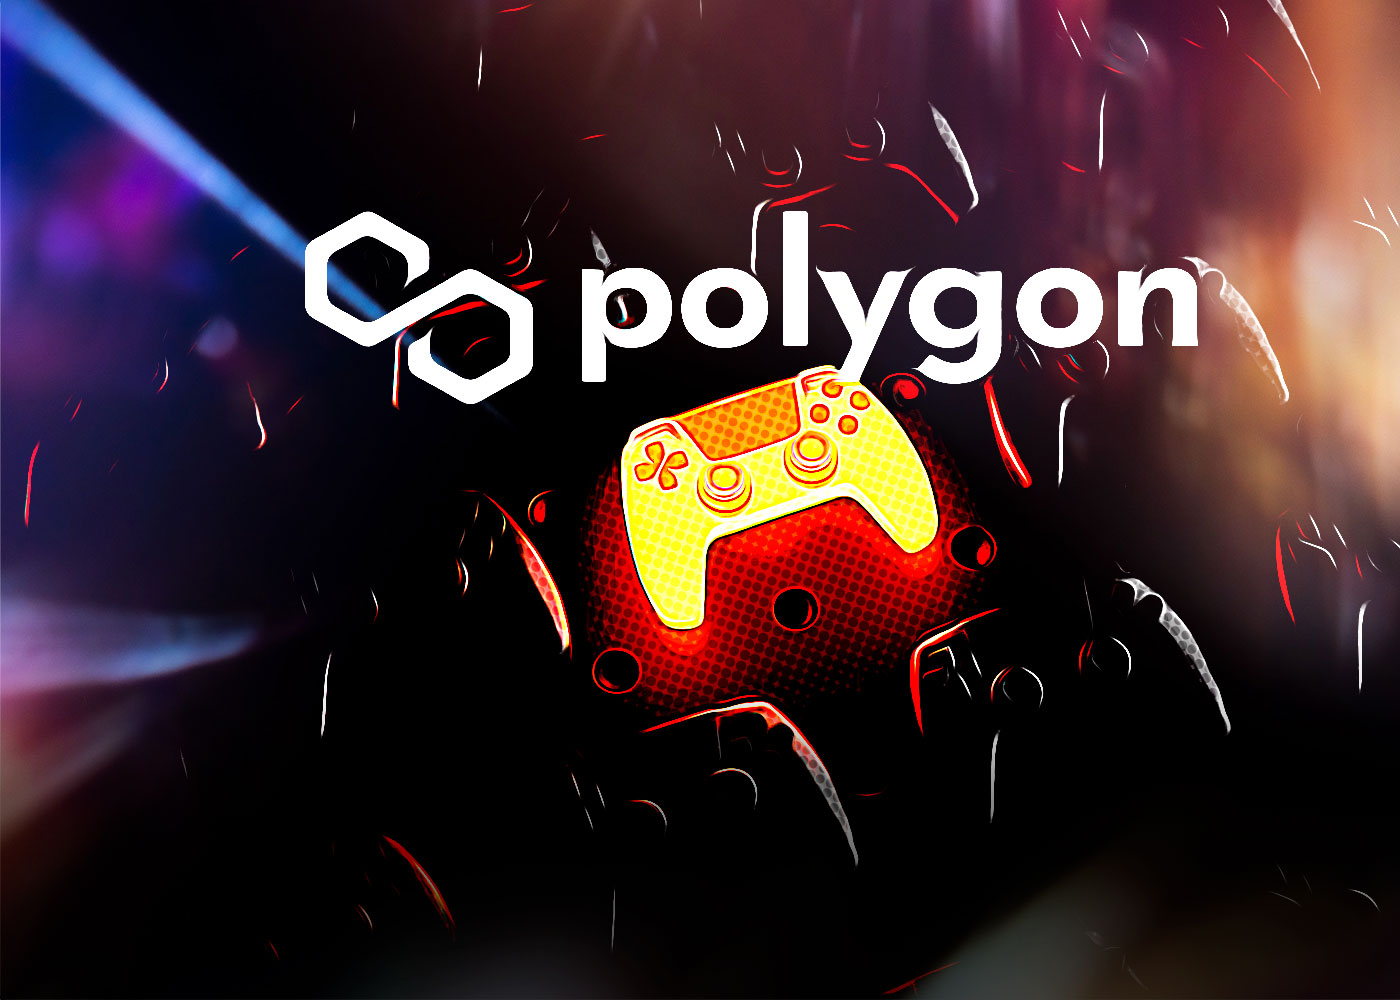 Polygon Co-founder Reveals Web3 Games as Key Catalyst for Cryptocurrency Adoption